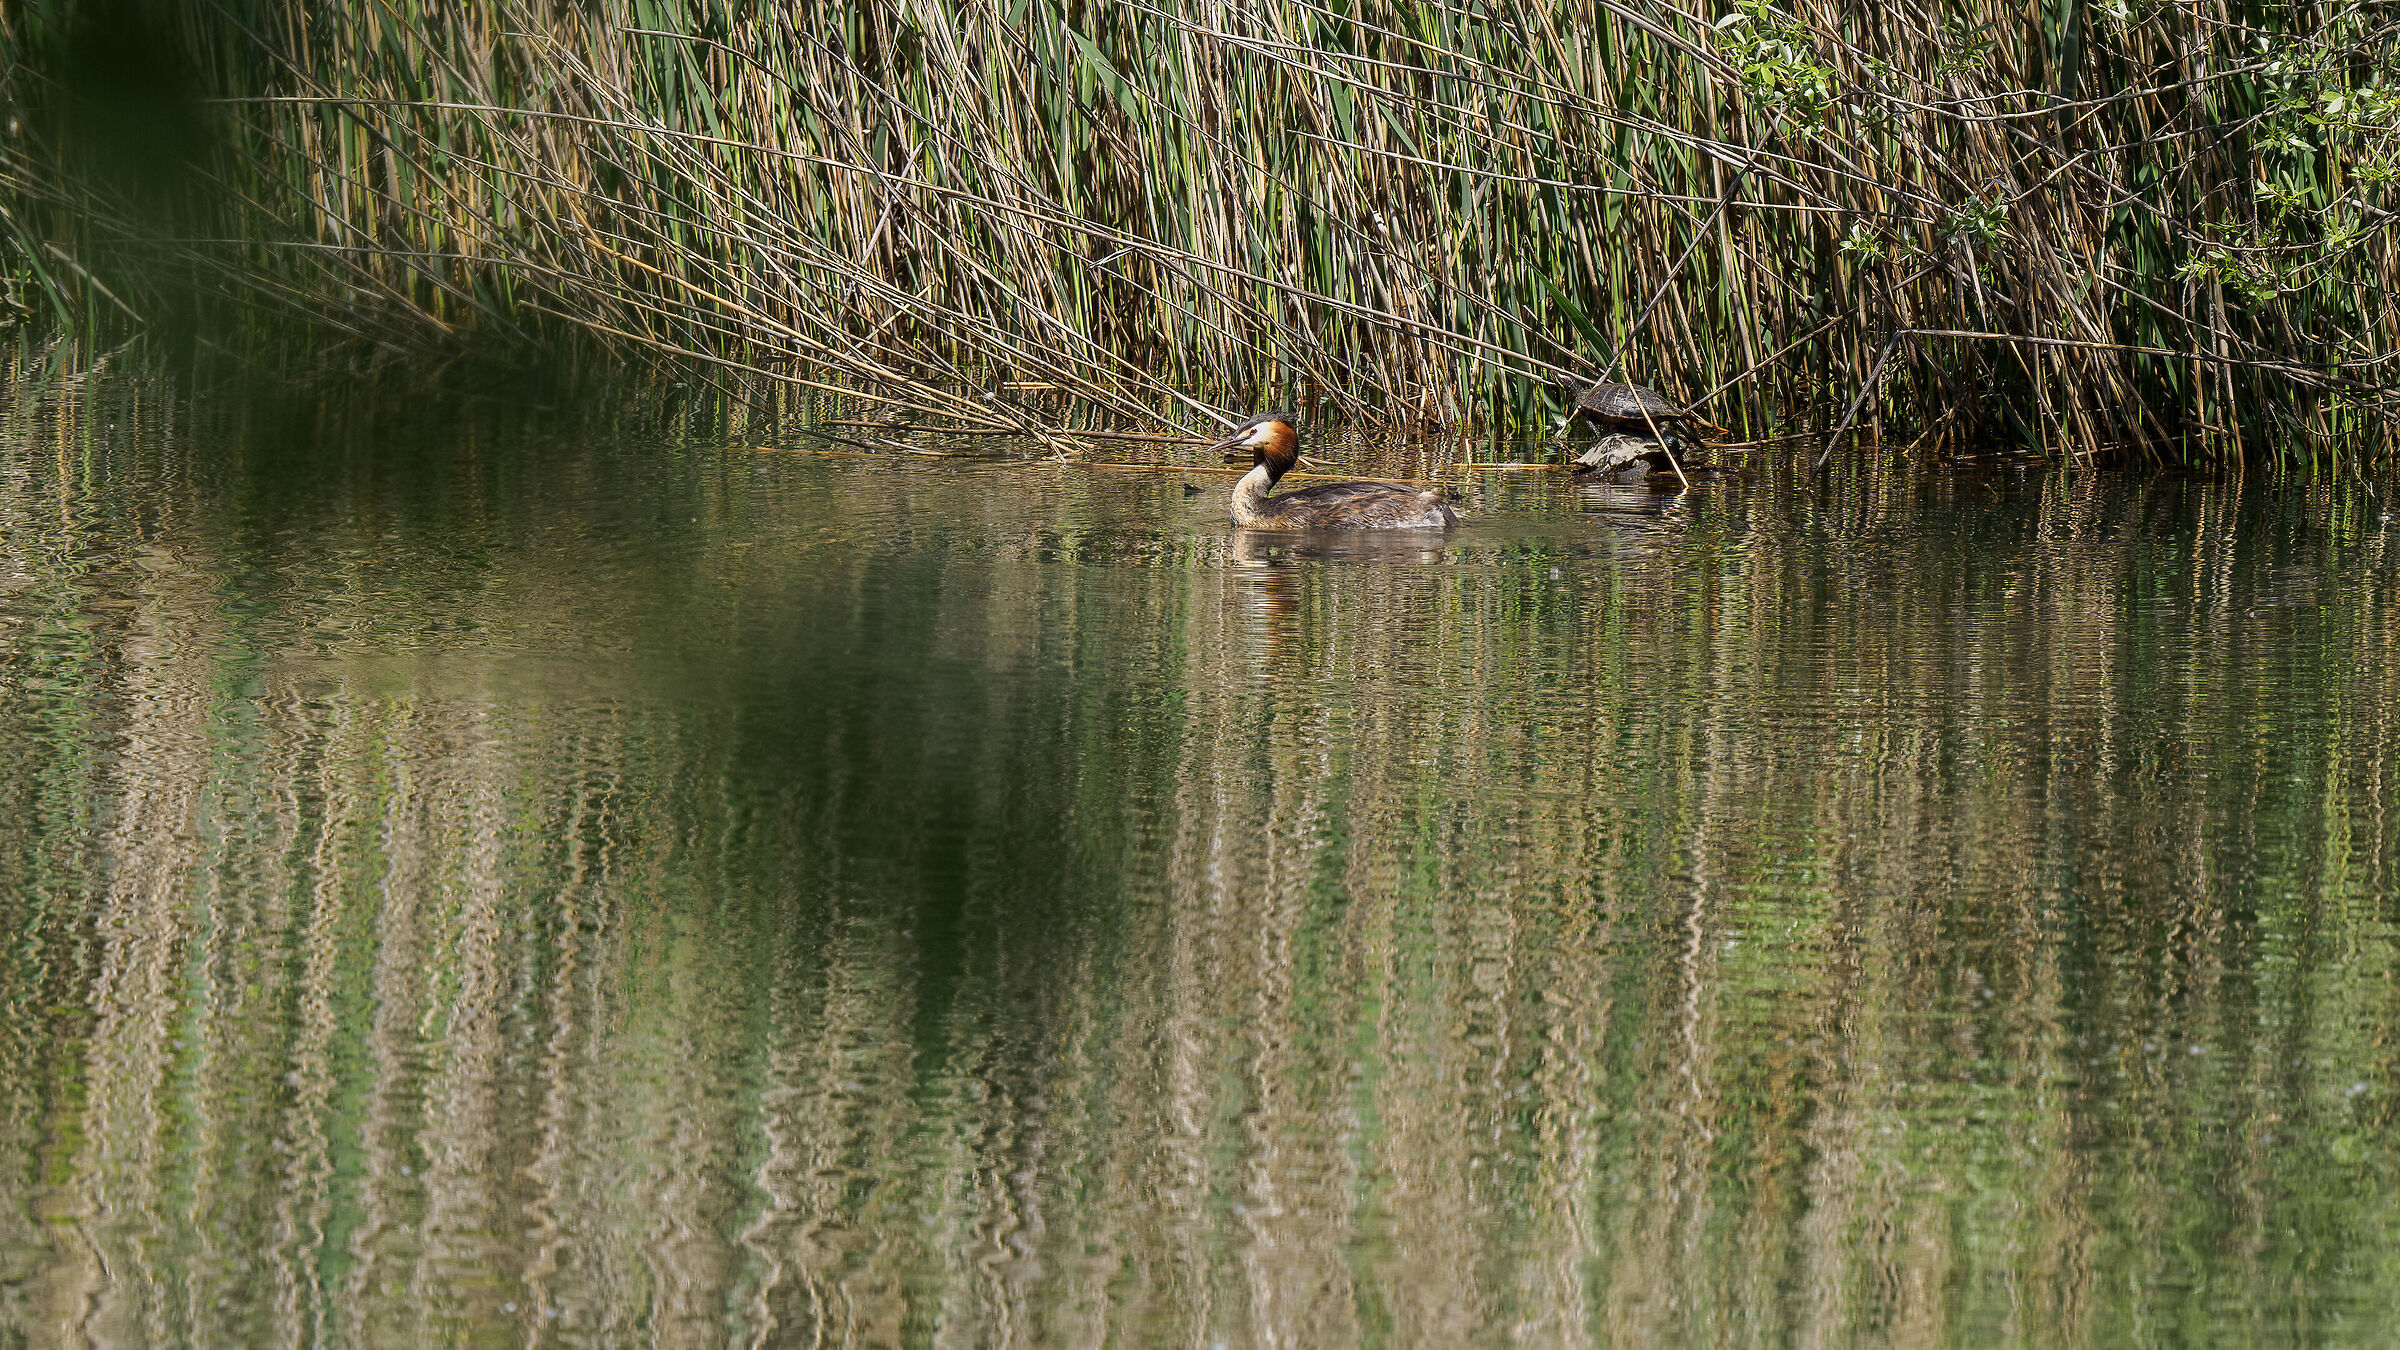 Grebe and turtles...